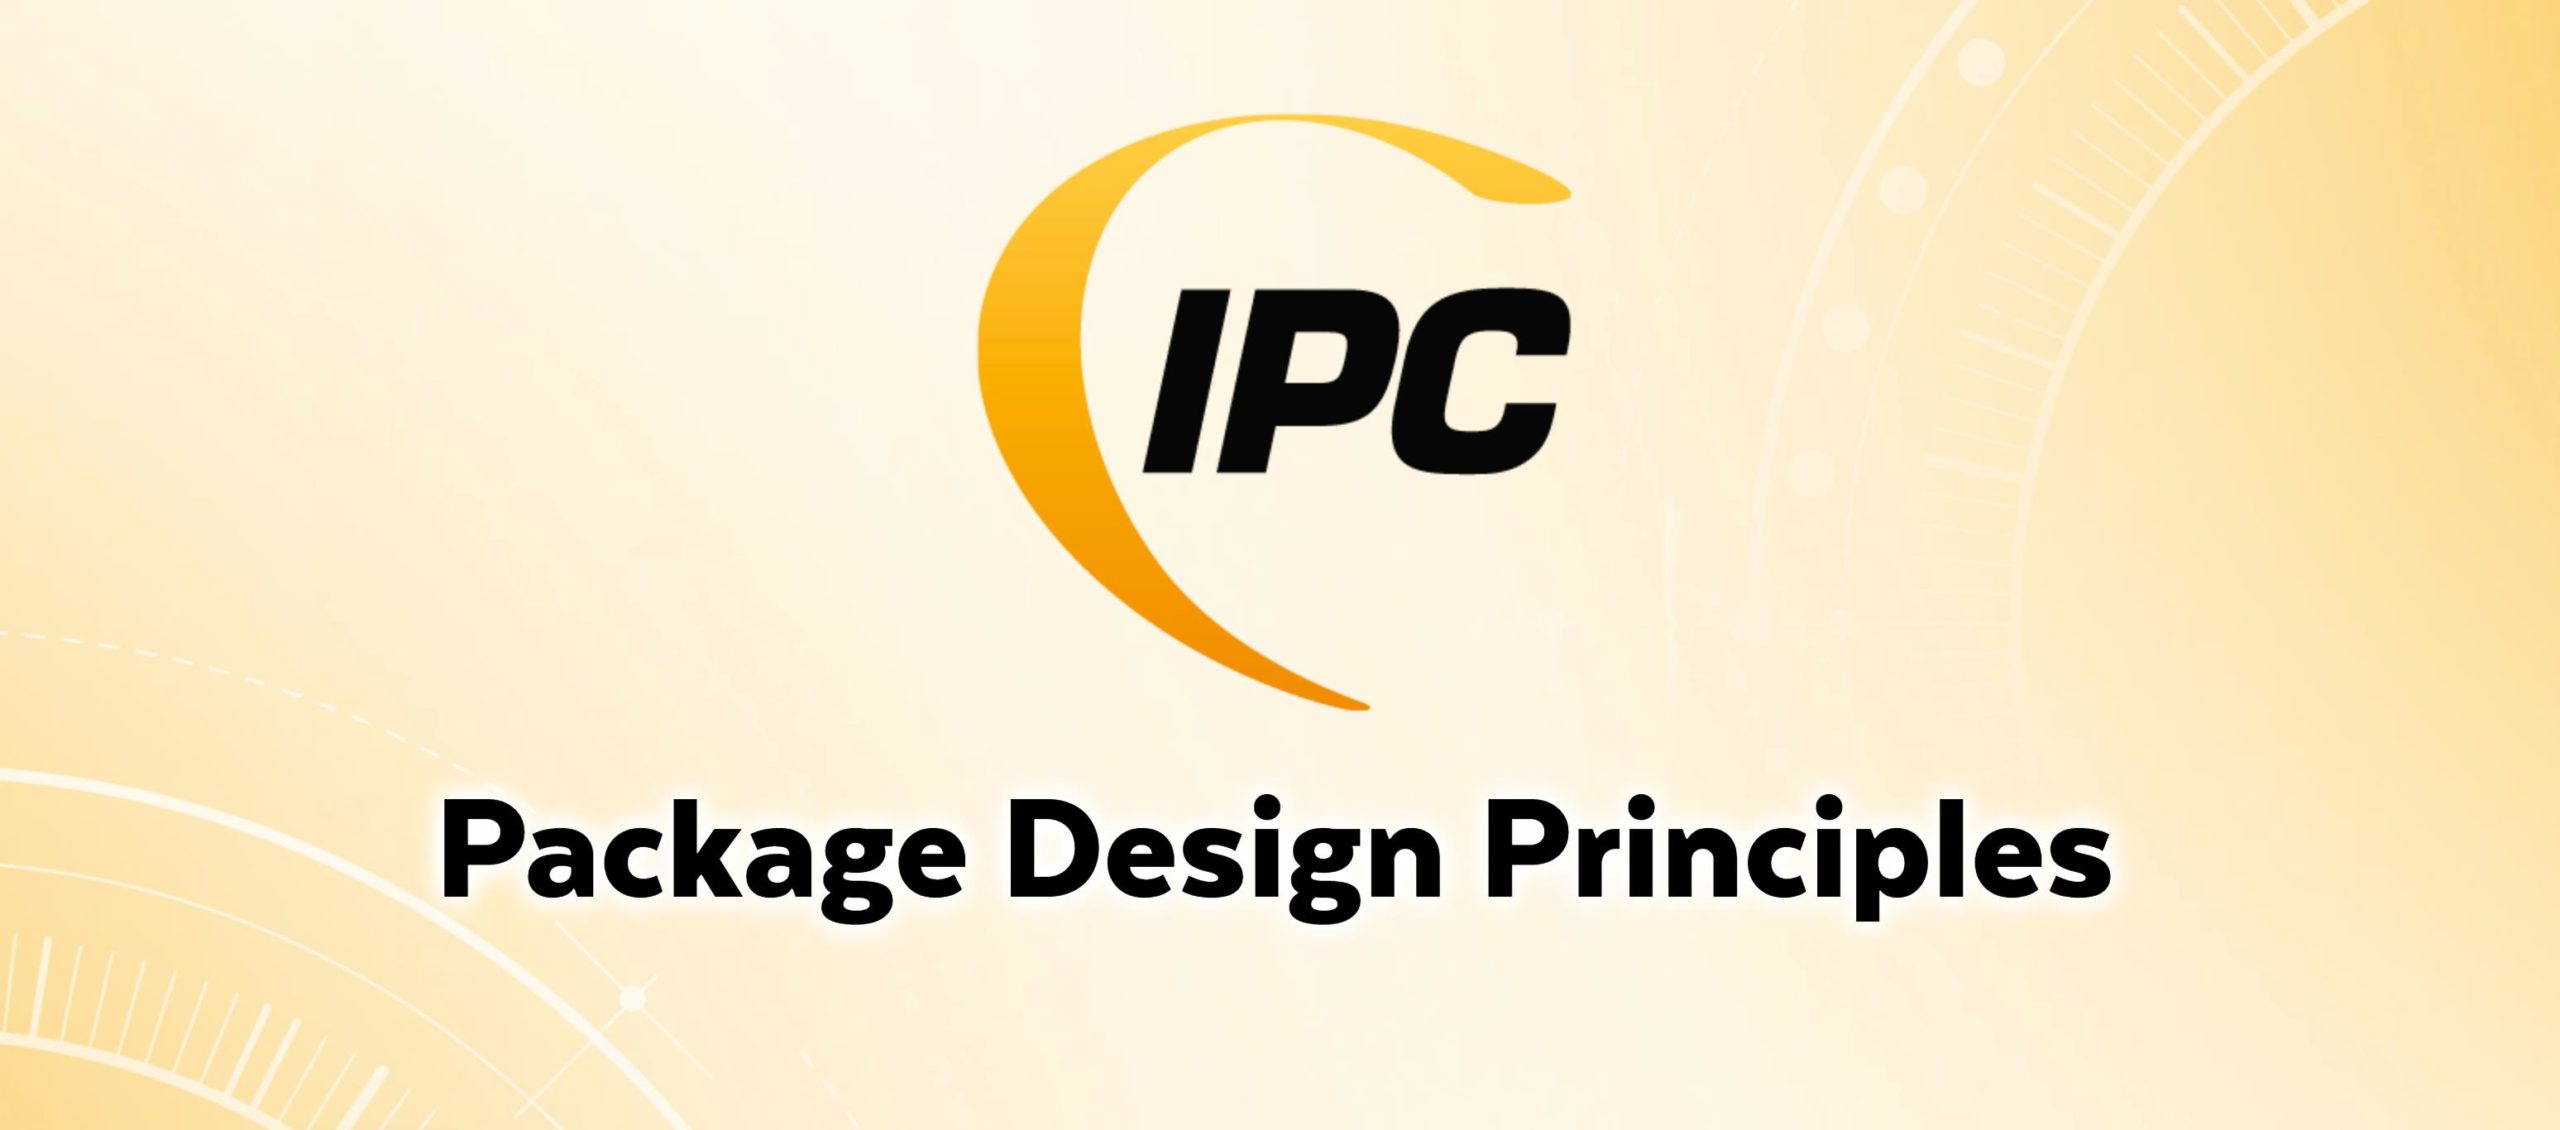 Title slide for the talk "Package Design Principles" from the International PHP Conference in Berlin 2021